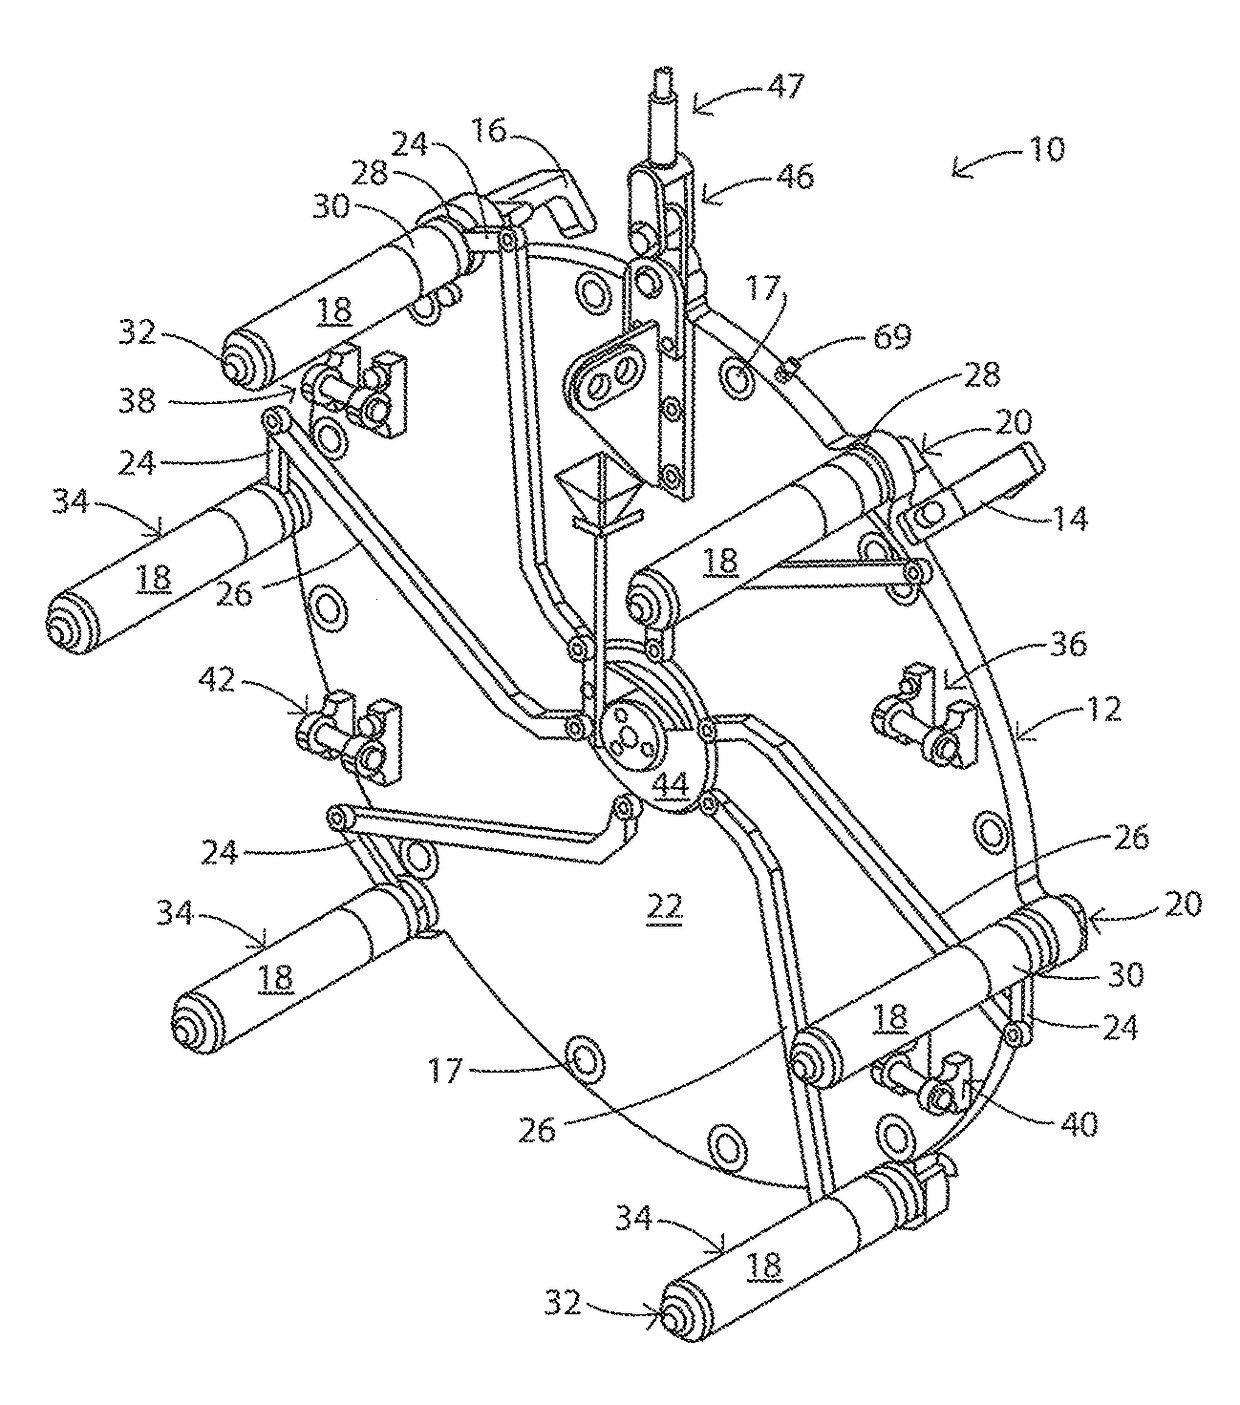 Remotely installed fuel transfer tube closure system